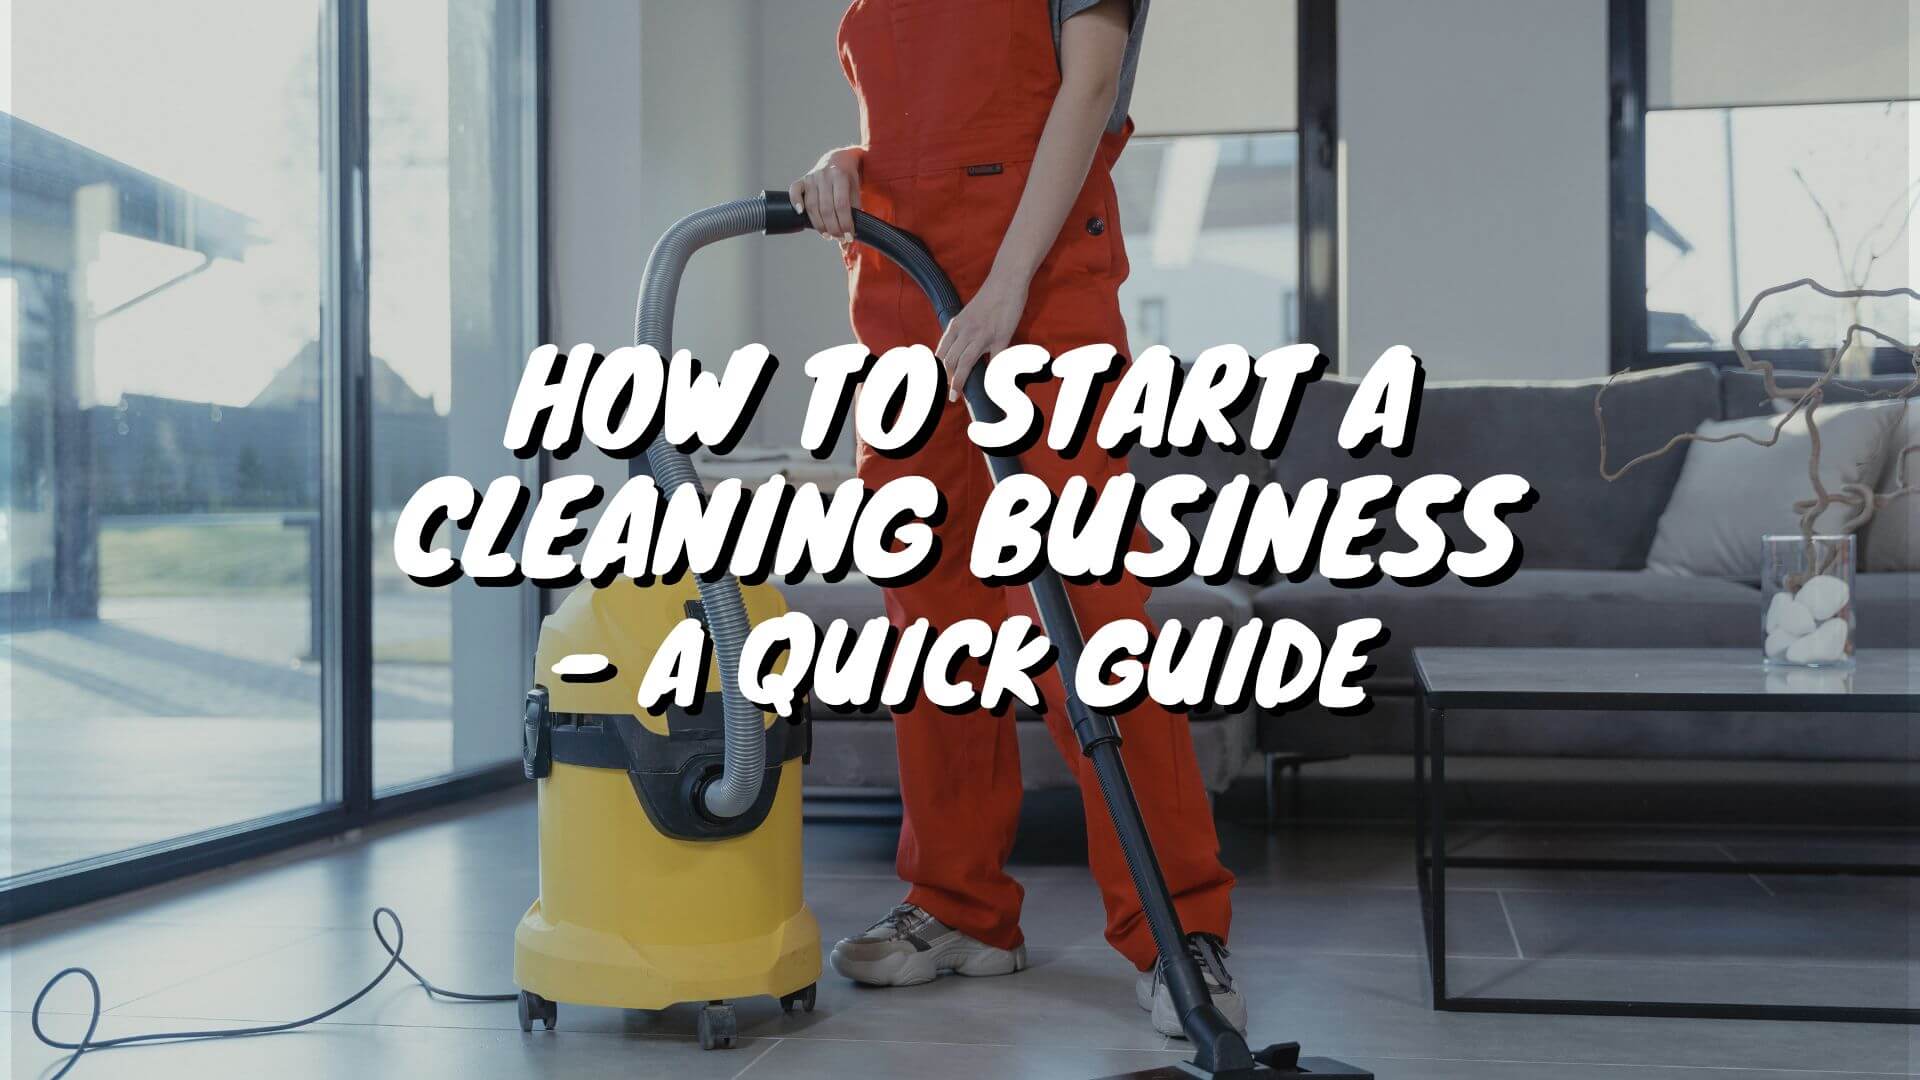 How to start a cleaning business? if you're interested but don't know how to start, This guide will walk you through it from scratch.